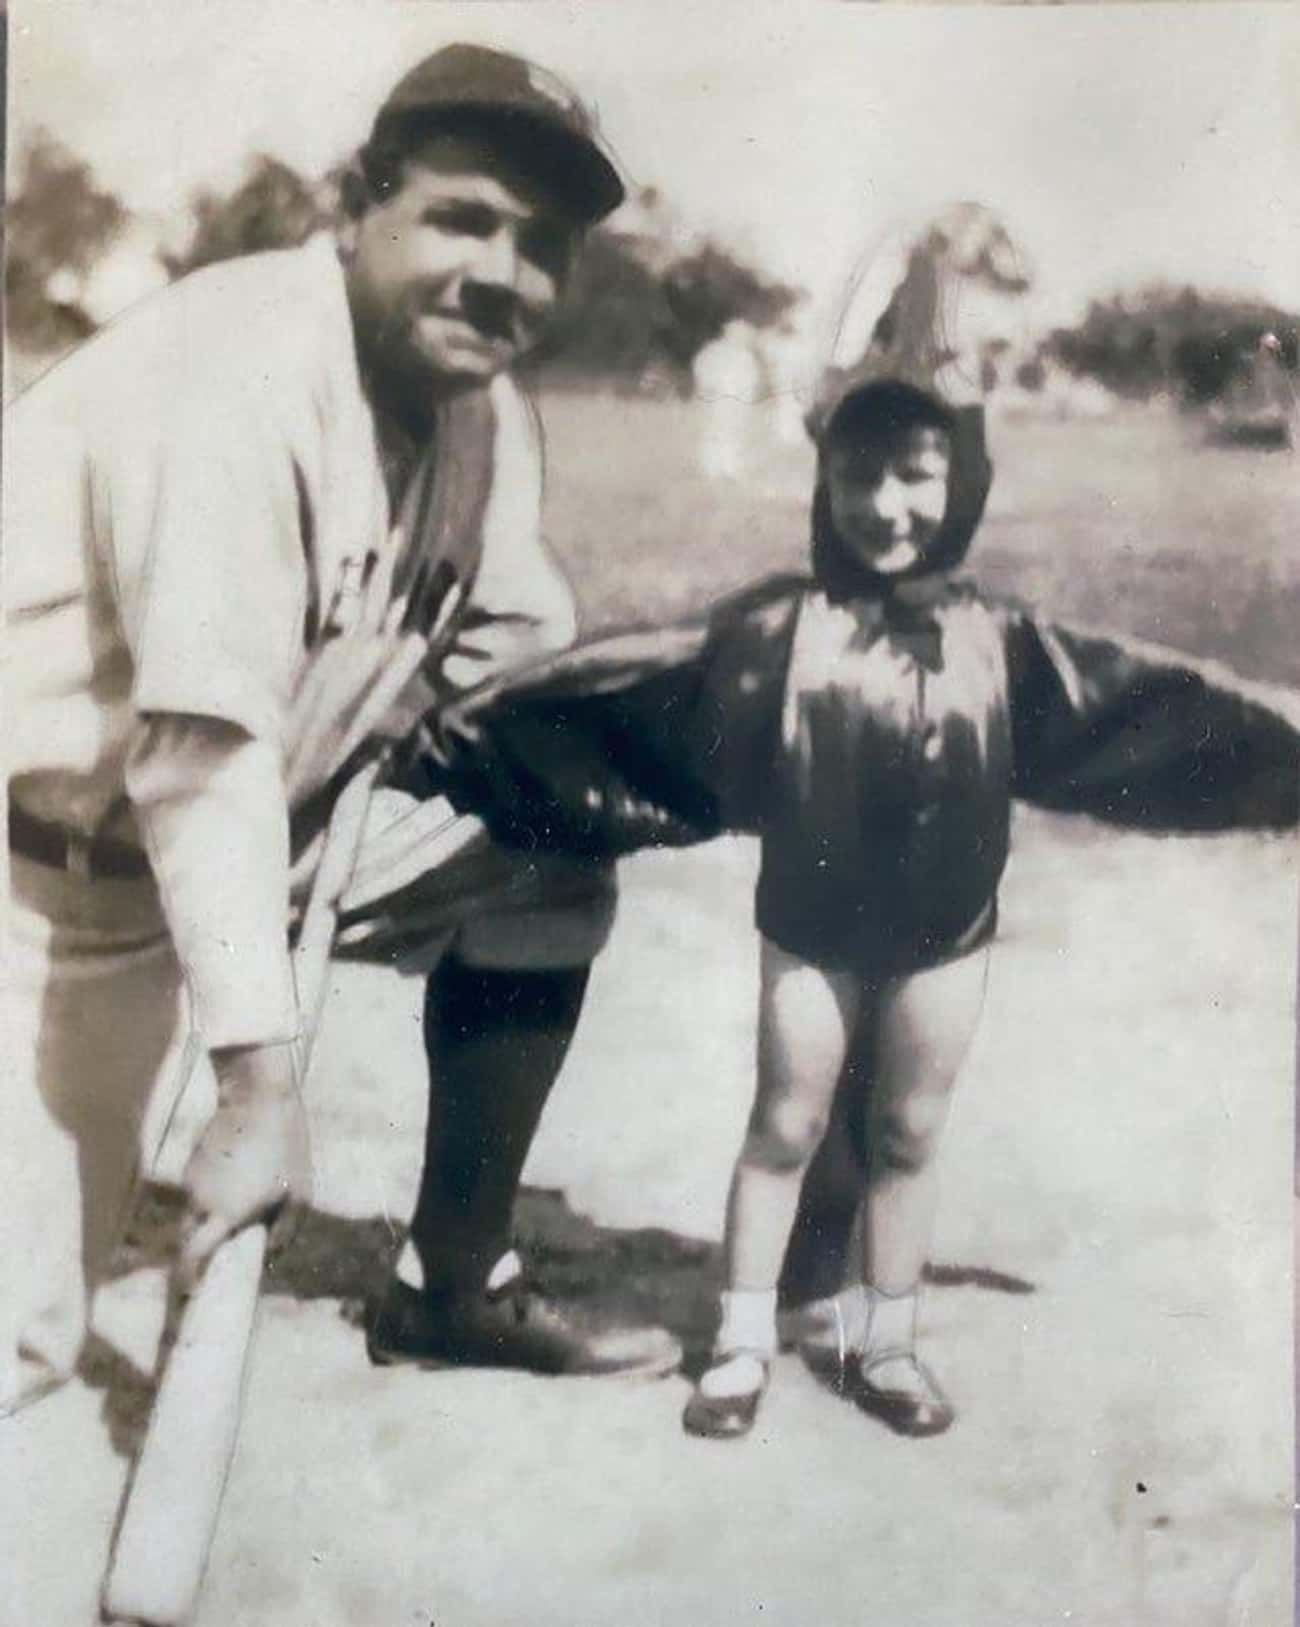 Meeting Babe Ruth In 1933